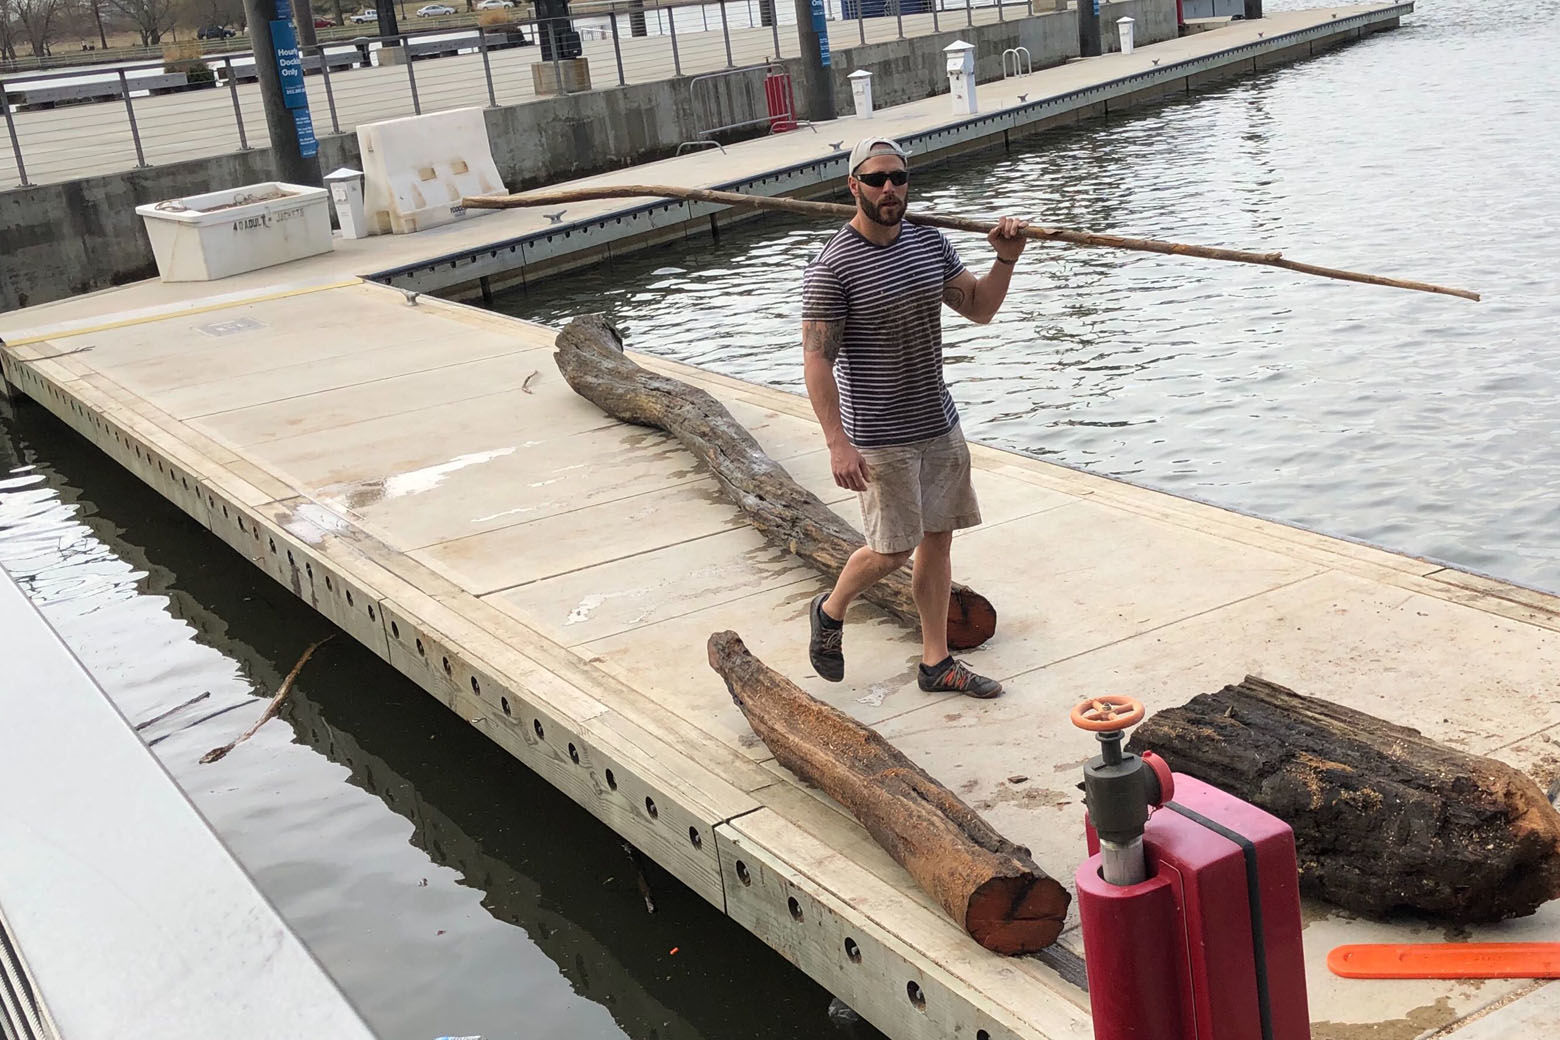 Sizes of wood debris vary greatly, some are more potentially dangerous to boat propellers than others. (WTOP/Kristi King)